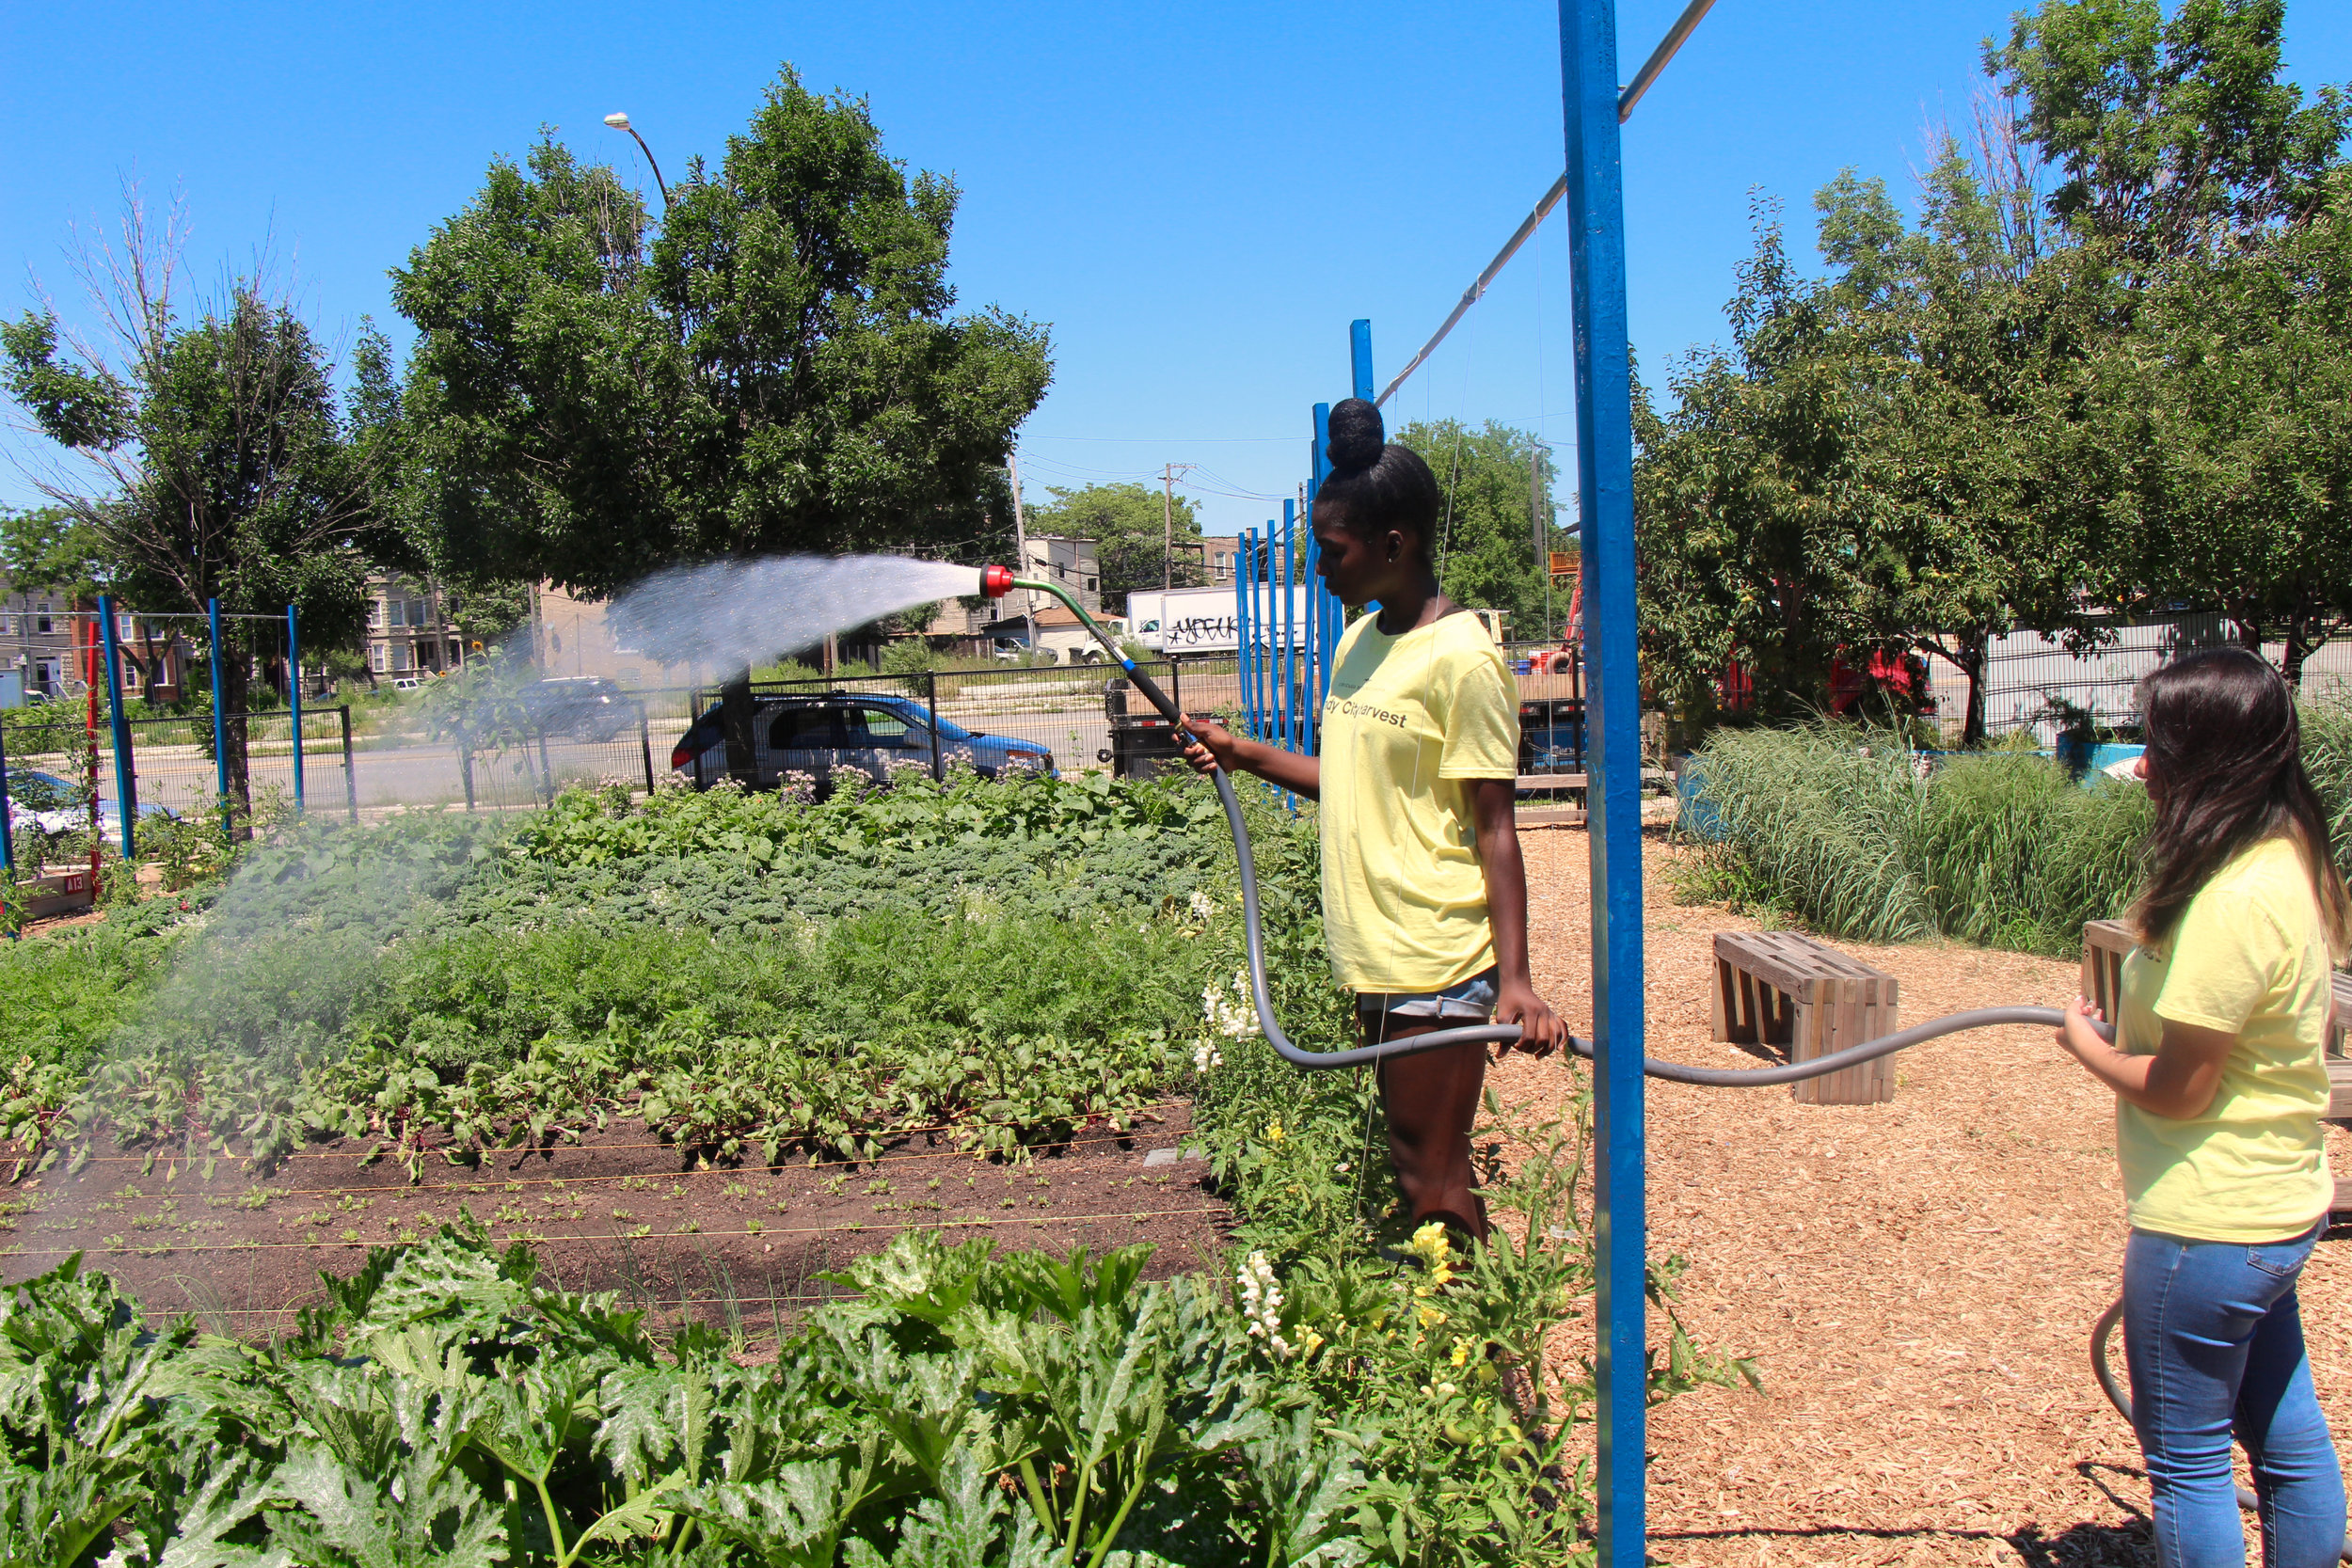 Keely Coates(left) and Melanie Franco (right) help water the vegetables to keep them fresh.